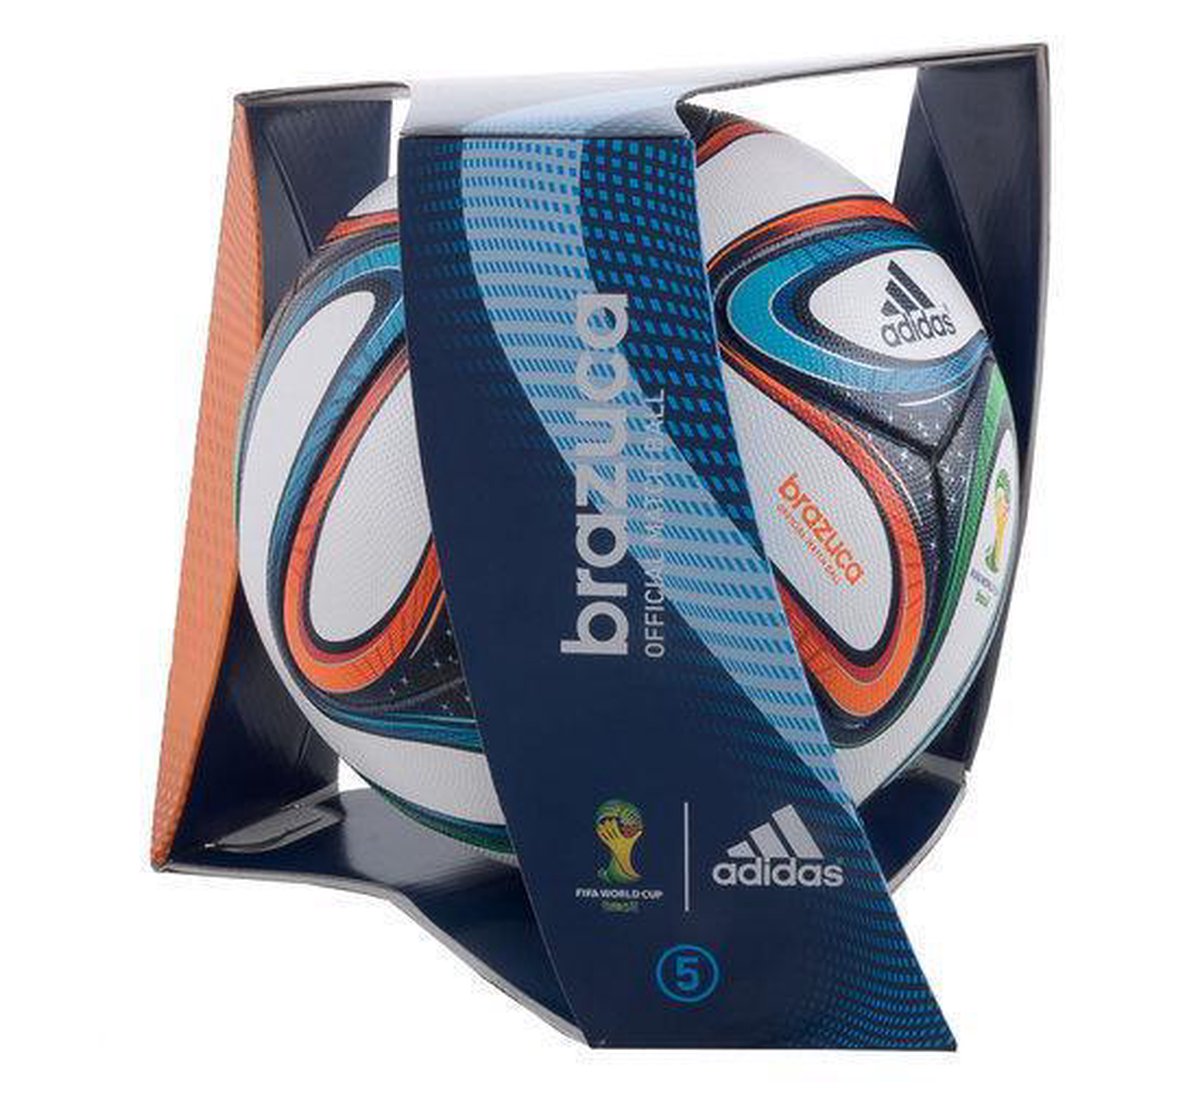 Adidas Brazuca Official Match Ball WK 2014 Voetbal | bol